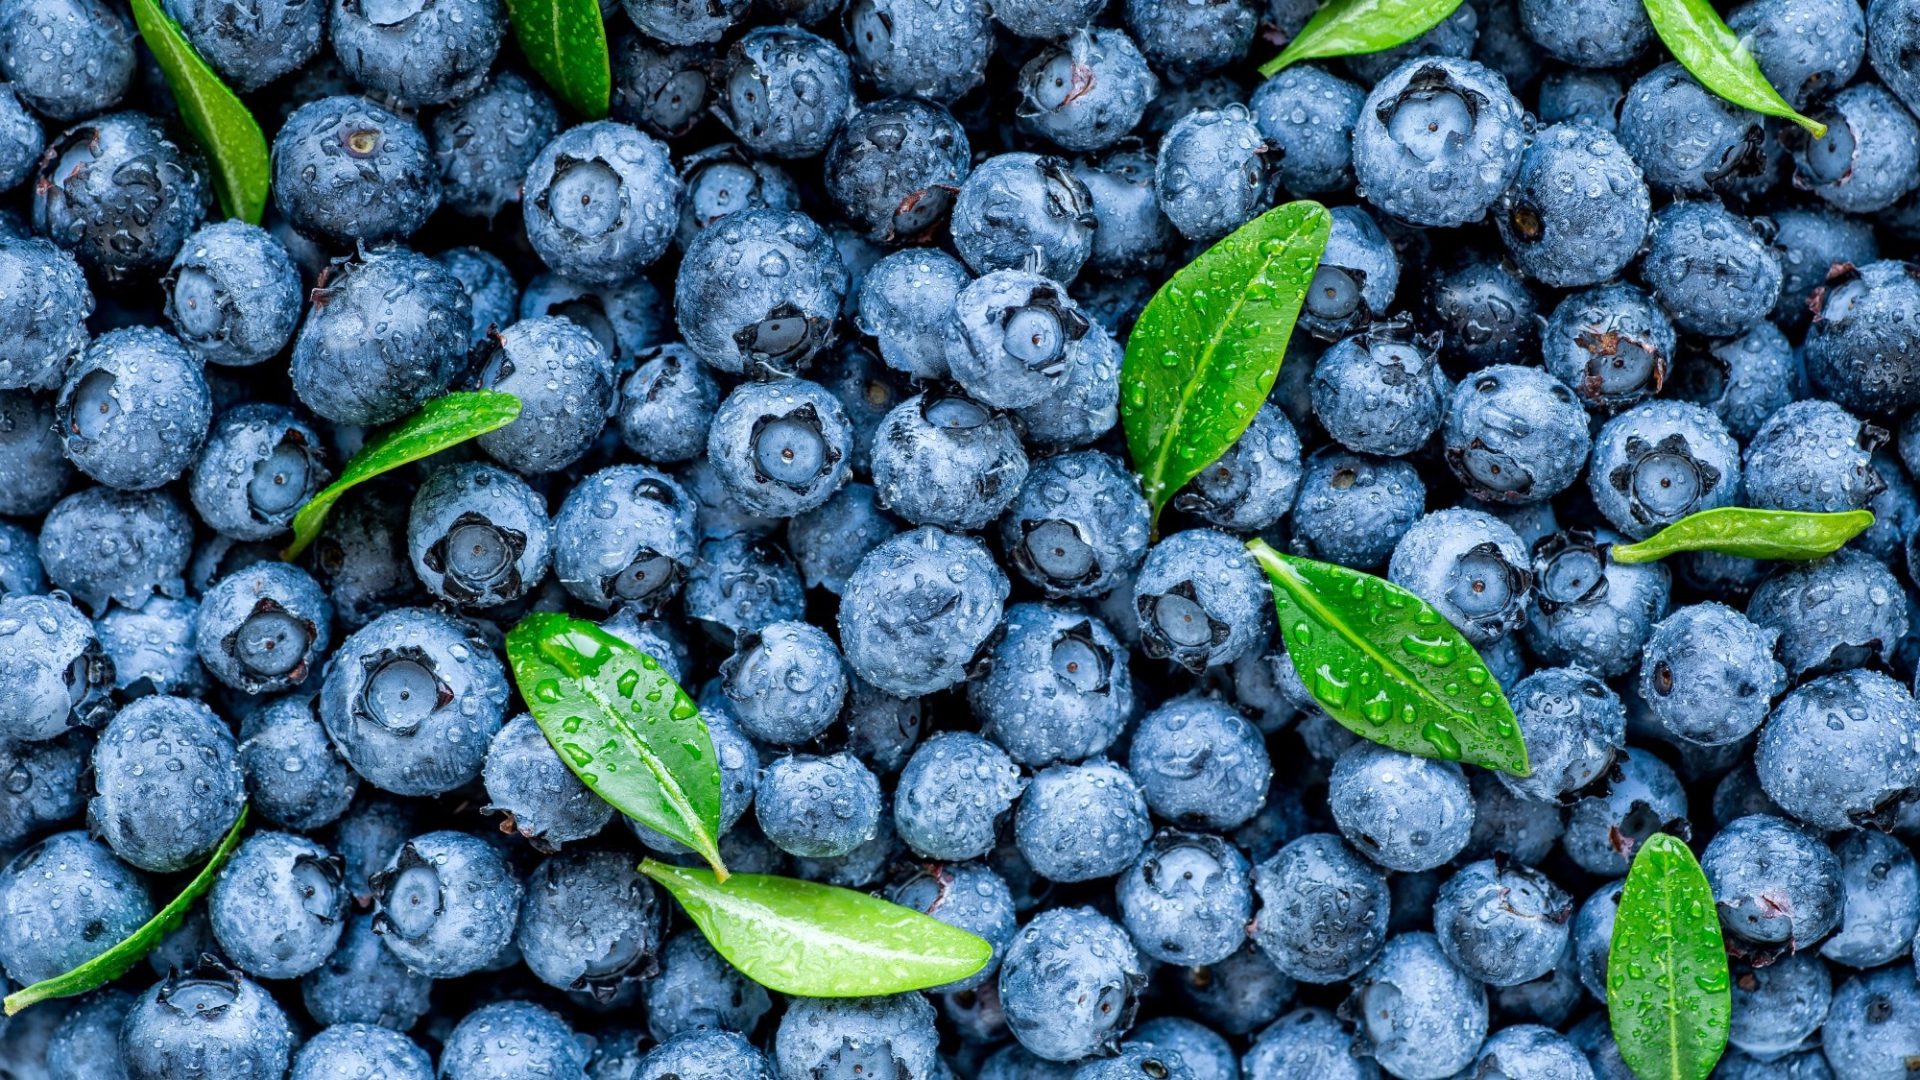 Blueberry consumption alleviates abdominal pain in gastrointestinal disorders